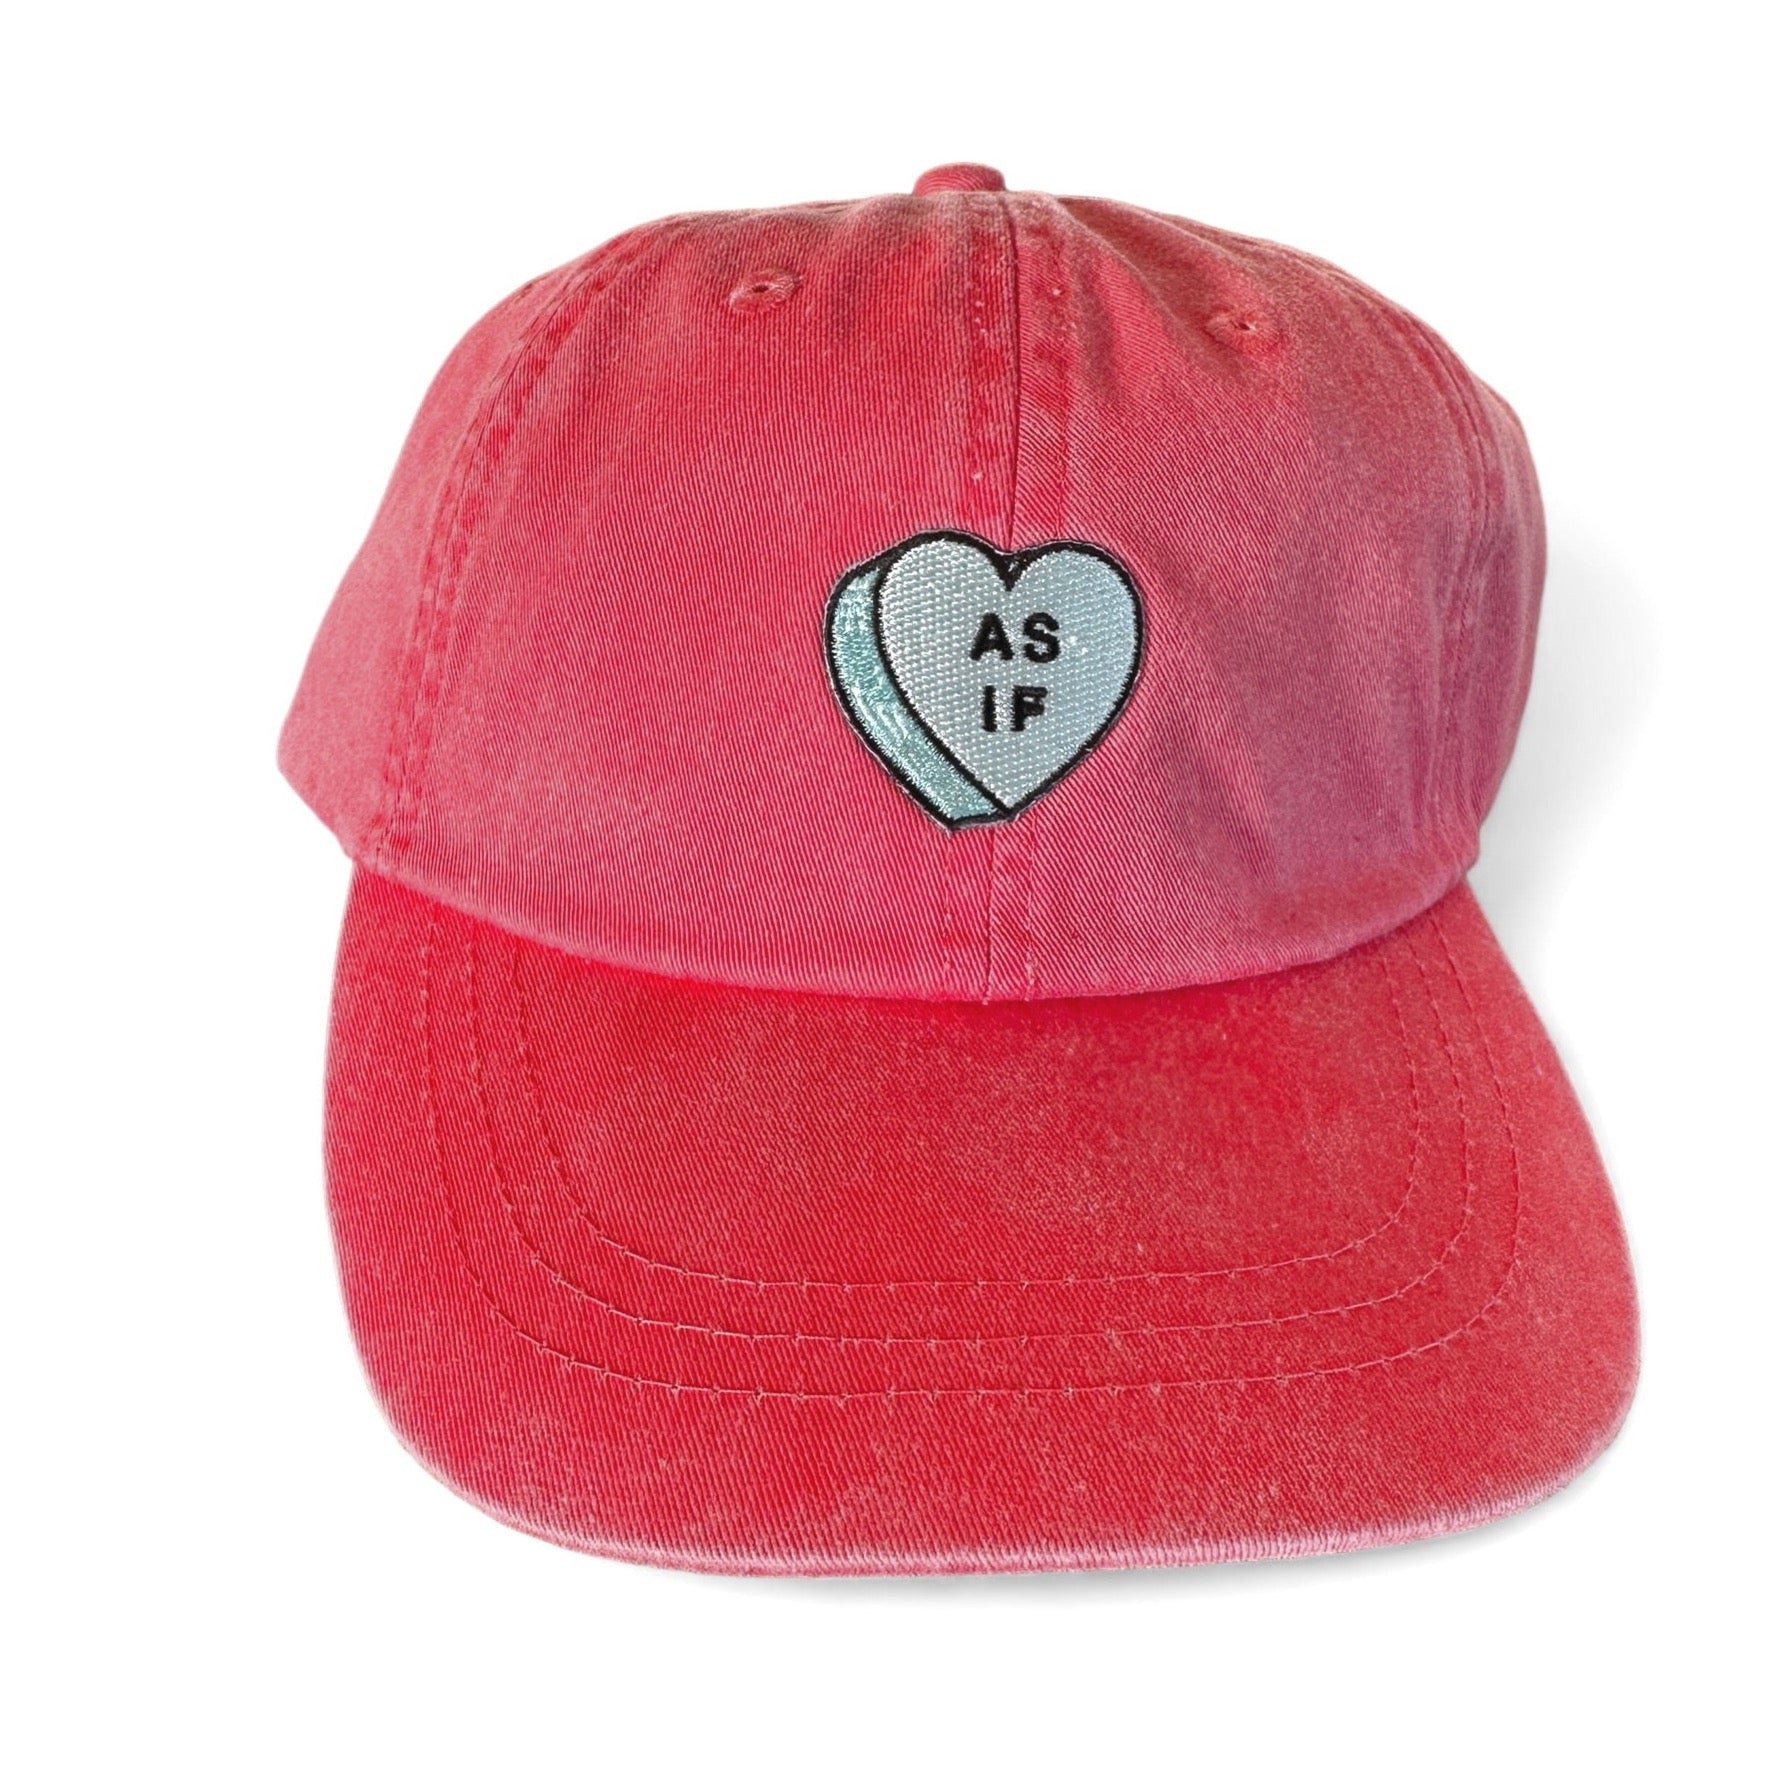 Candy Heart Patch Baseball Hat - As If